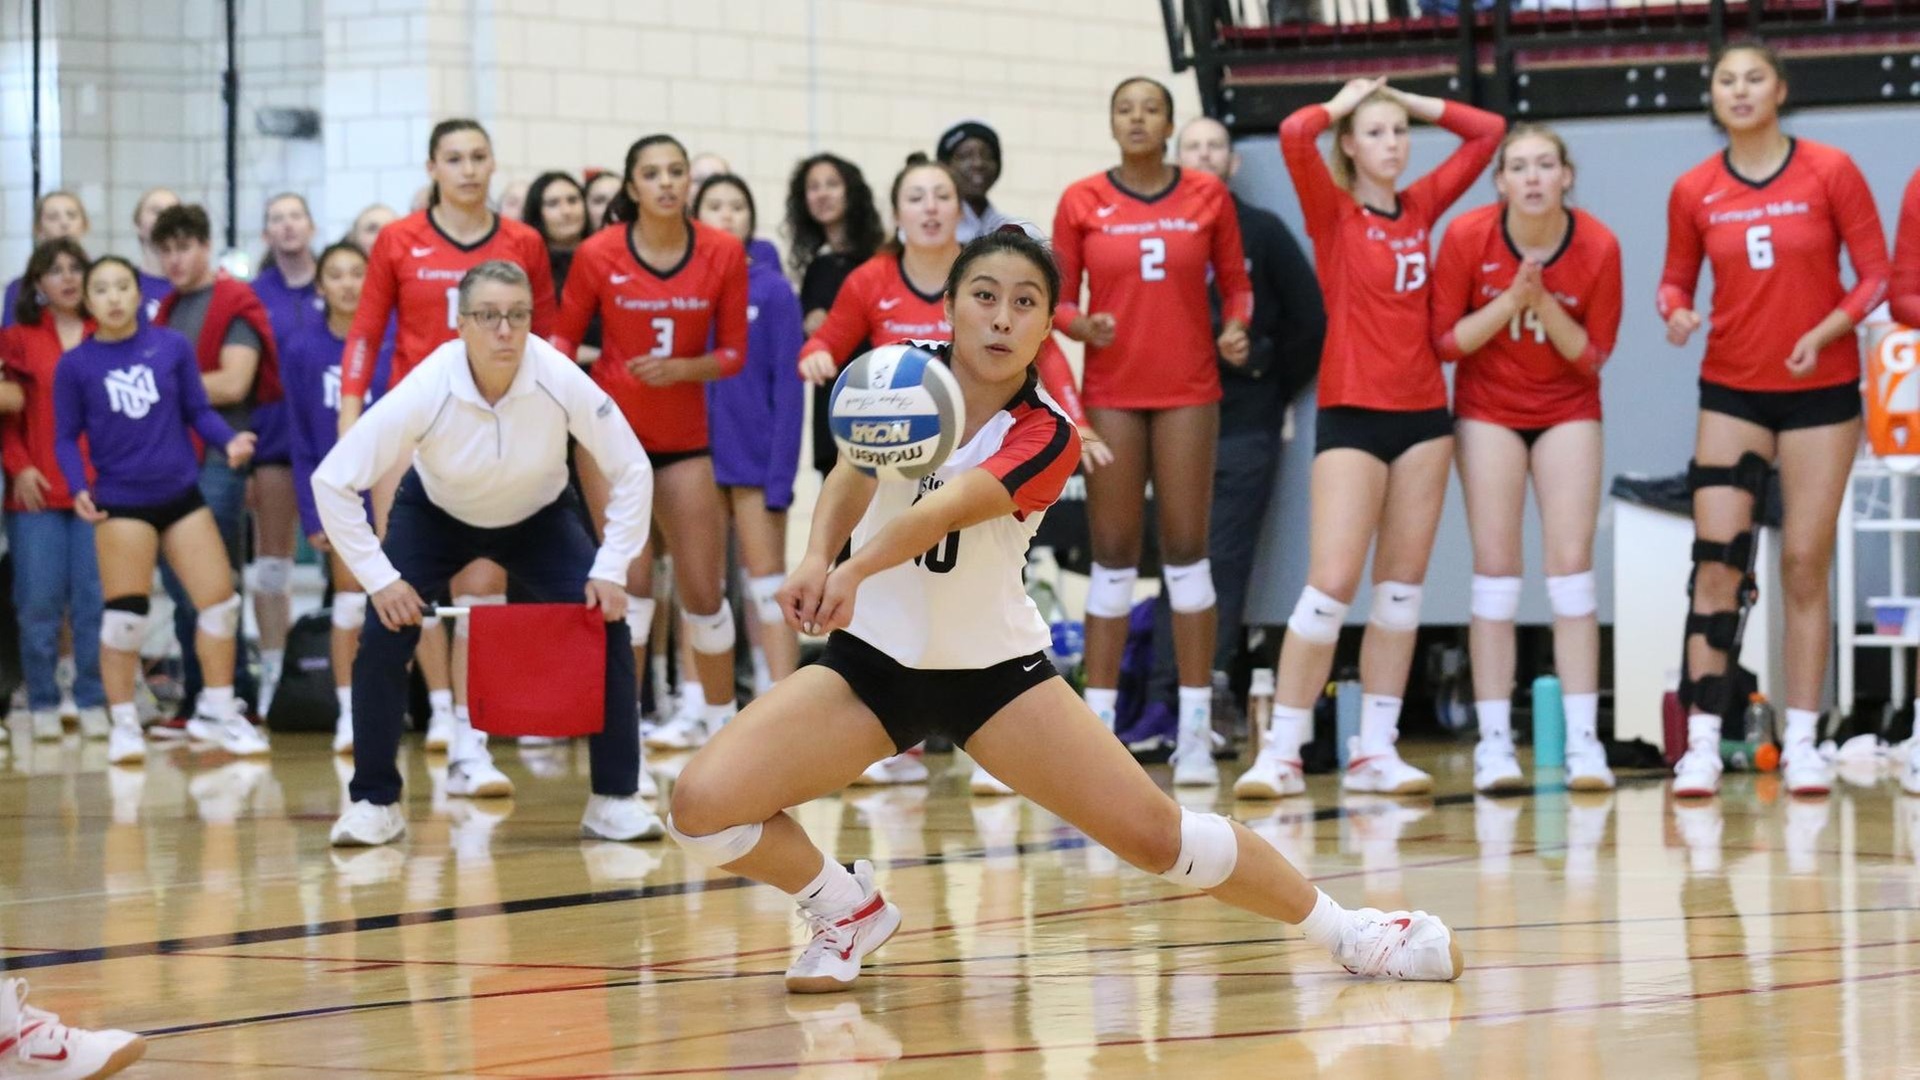 women's volleyball player with knees low to the court to dig the ball